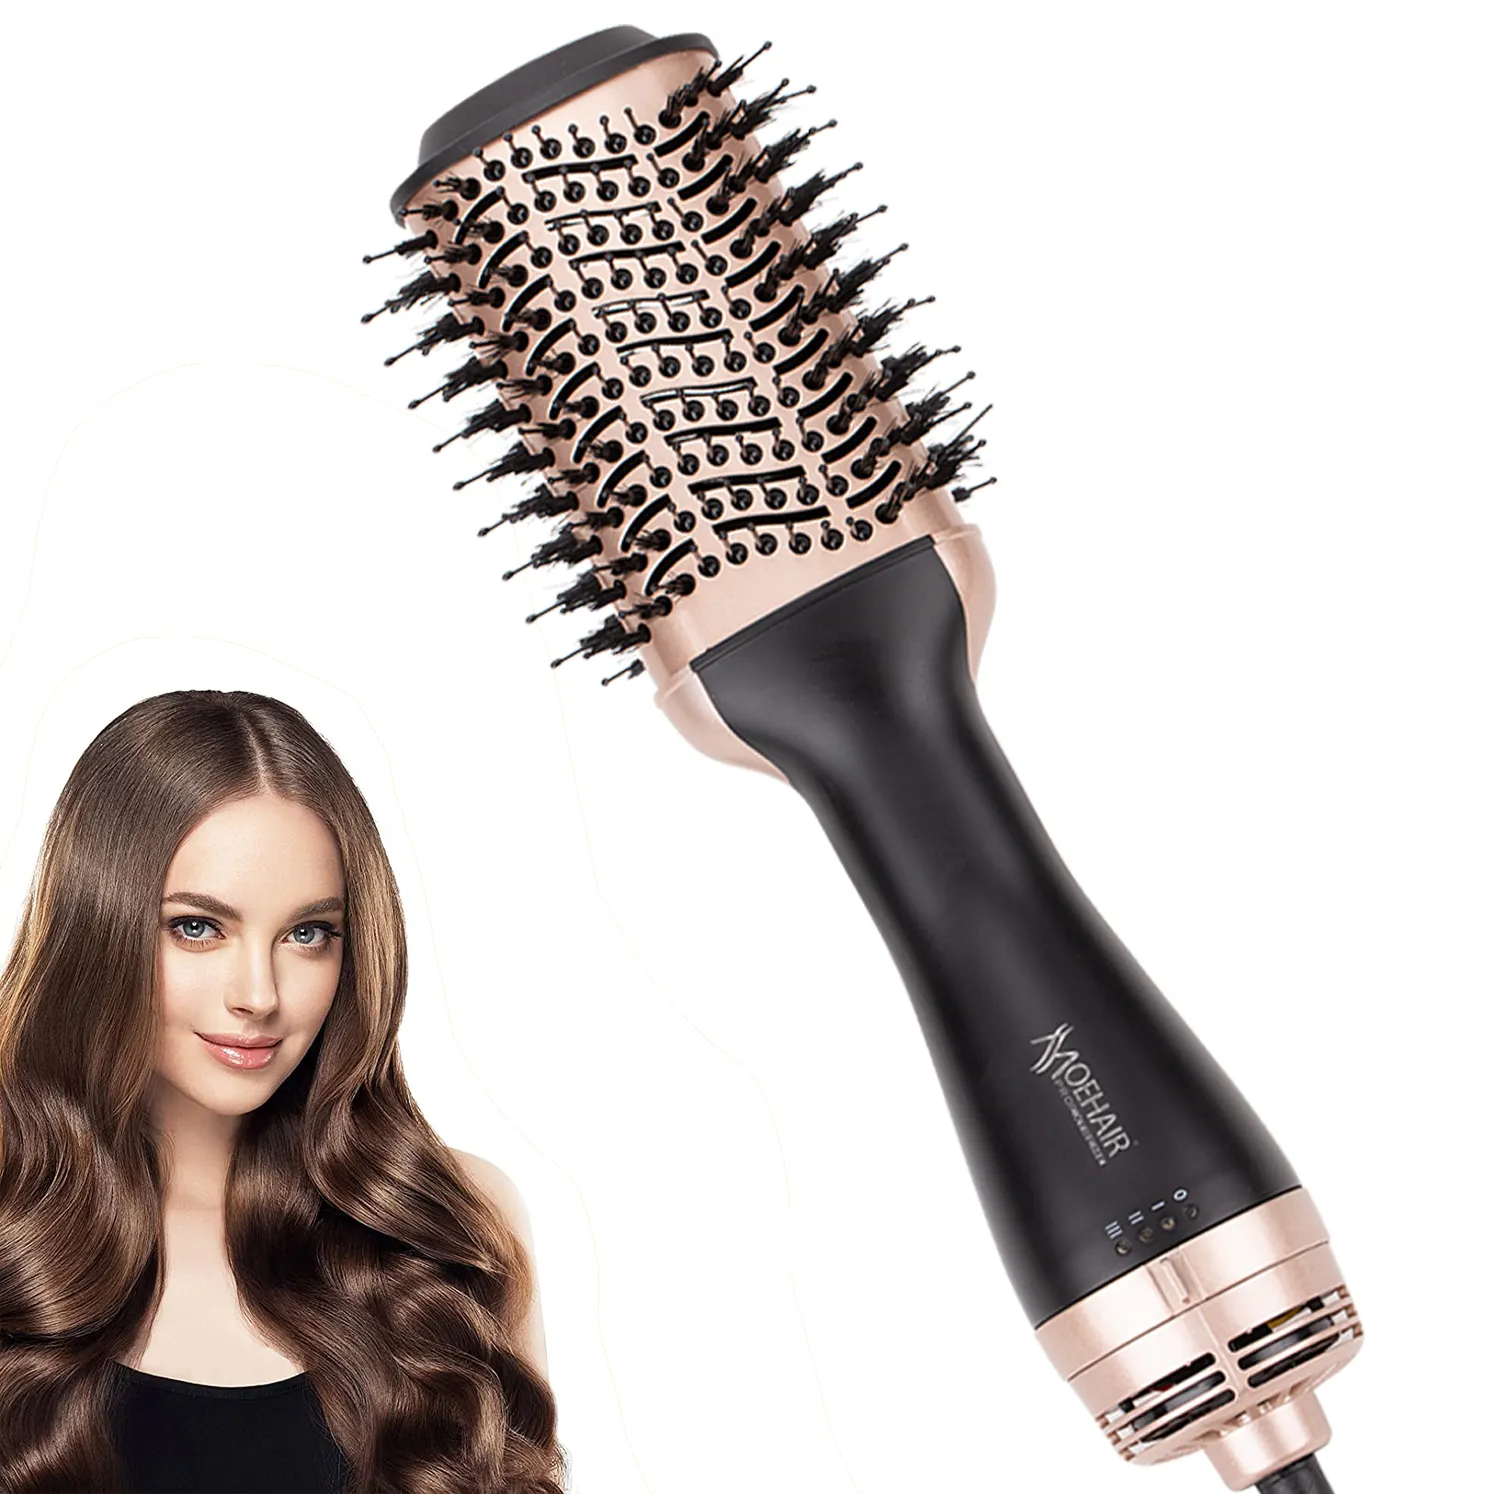 Hair Brush Hair Dryer 2022 New Arrival Professional Multifunctional 3 In 1 Hot Cold 1200W Blow Hair Straightener Curler Comb 1 Step Hair Brush Dryer